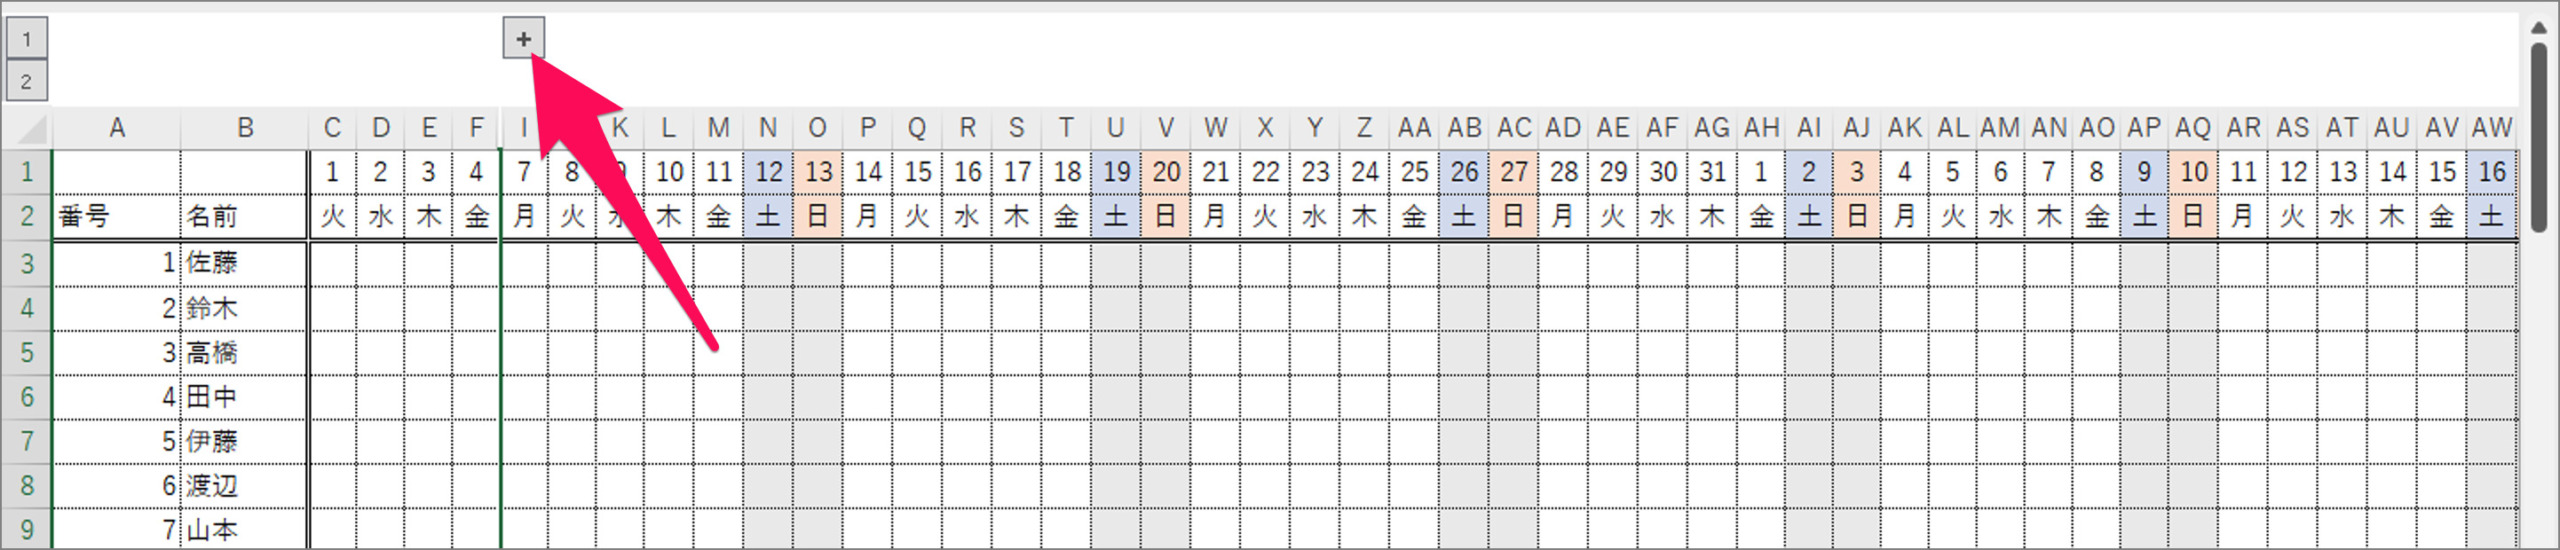 grouping excel rows columns a06 scaled